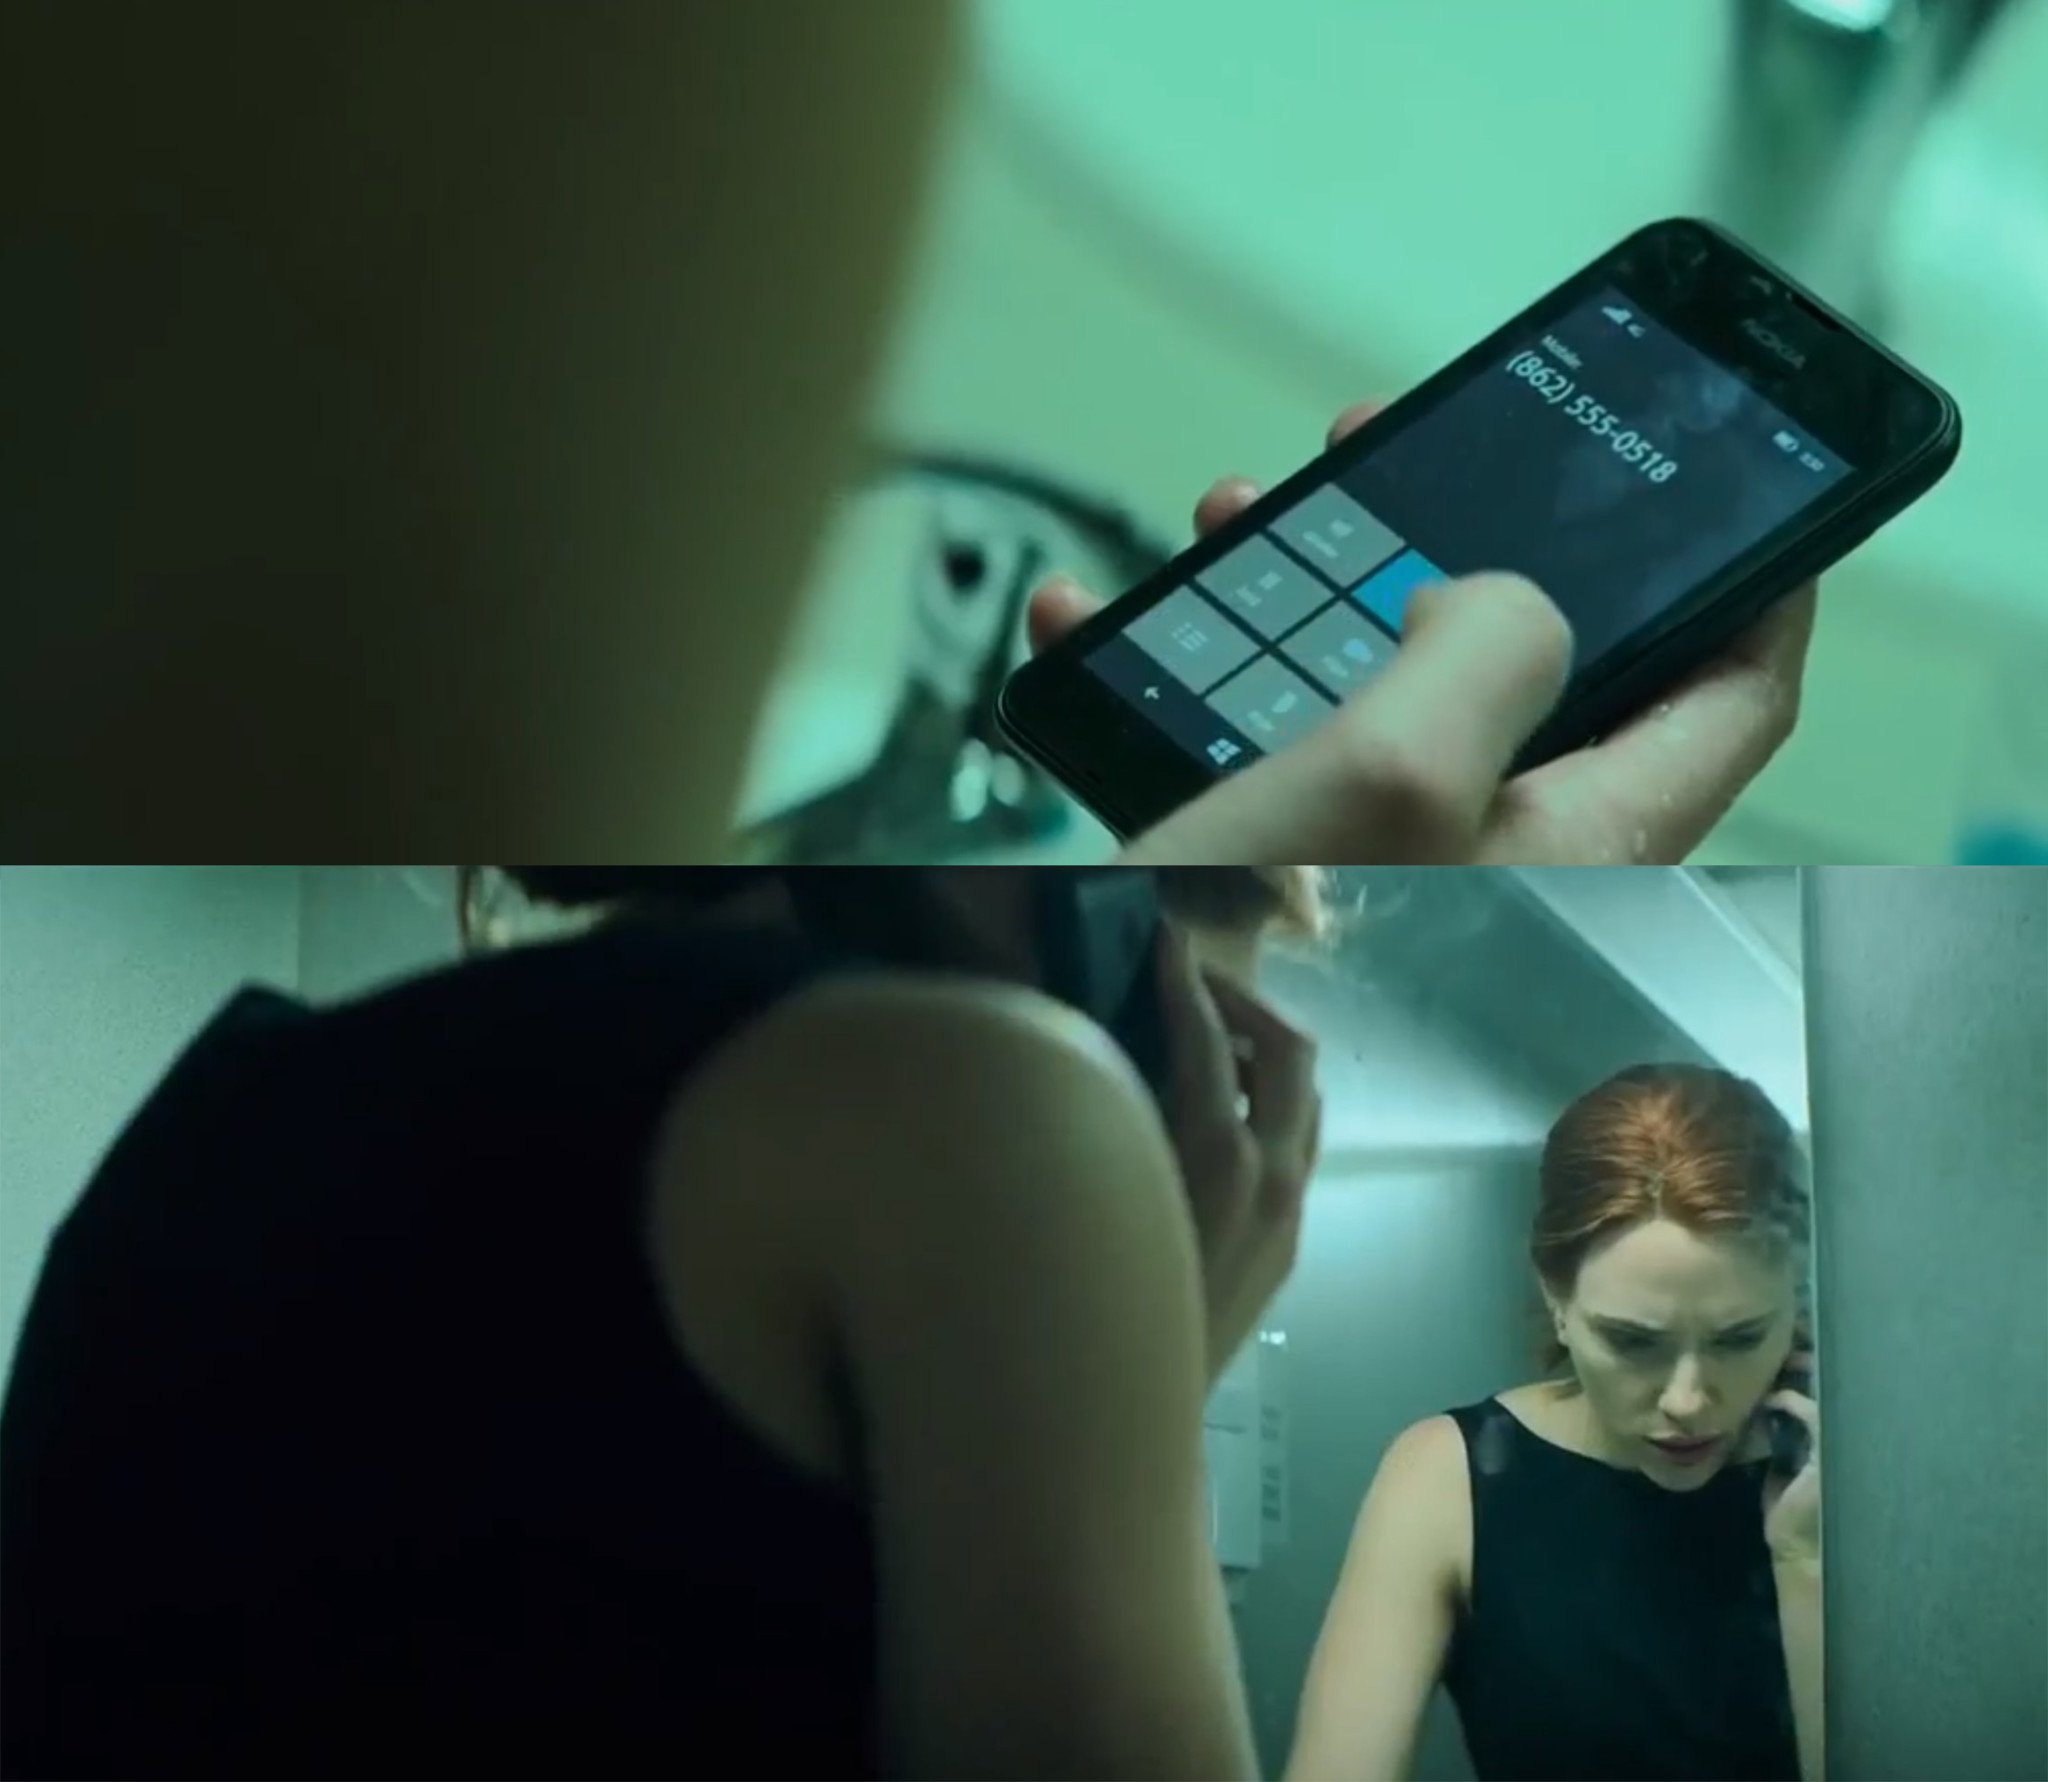 Windows 10 Mobile appears in the new ‘Black Widow’ movie 🤔